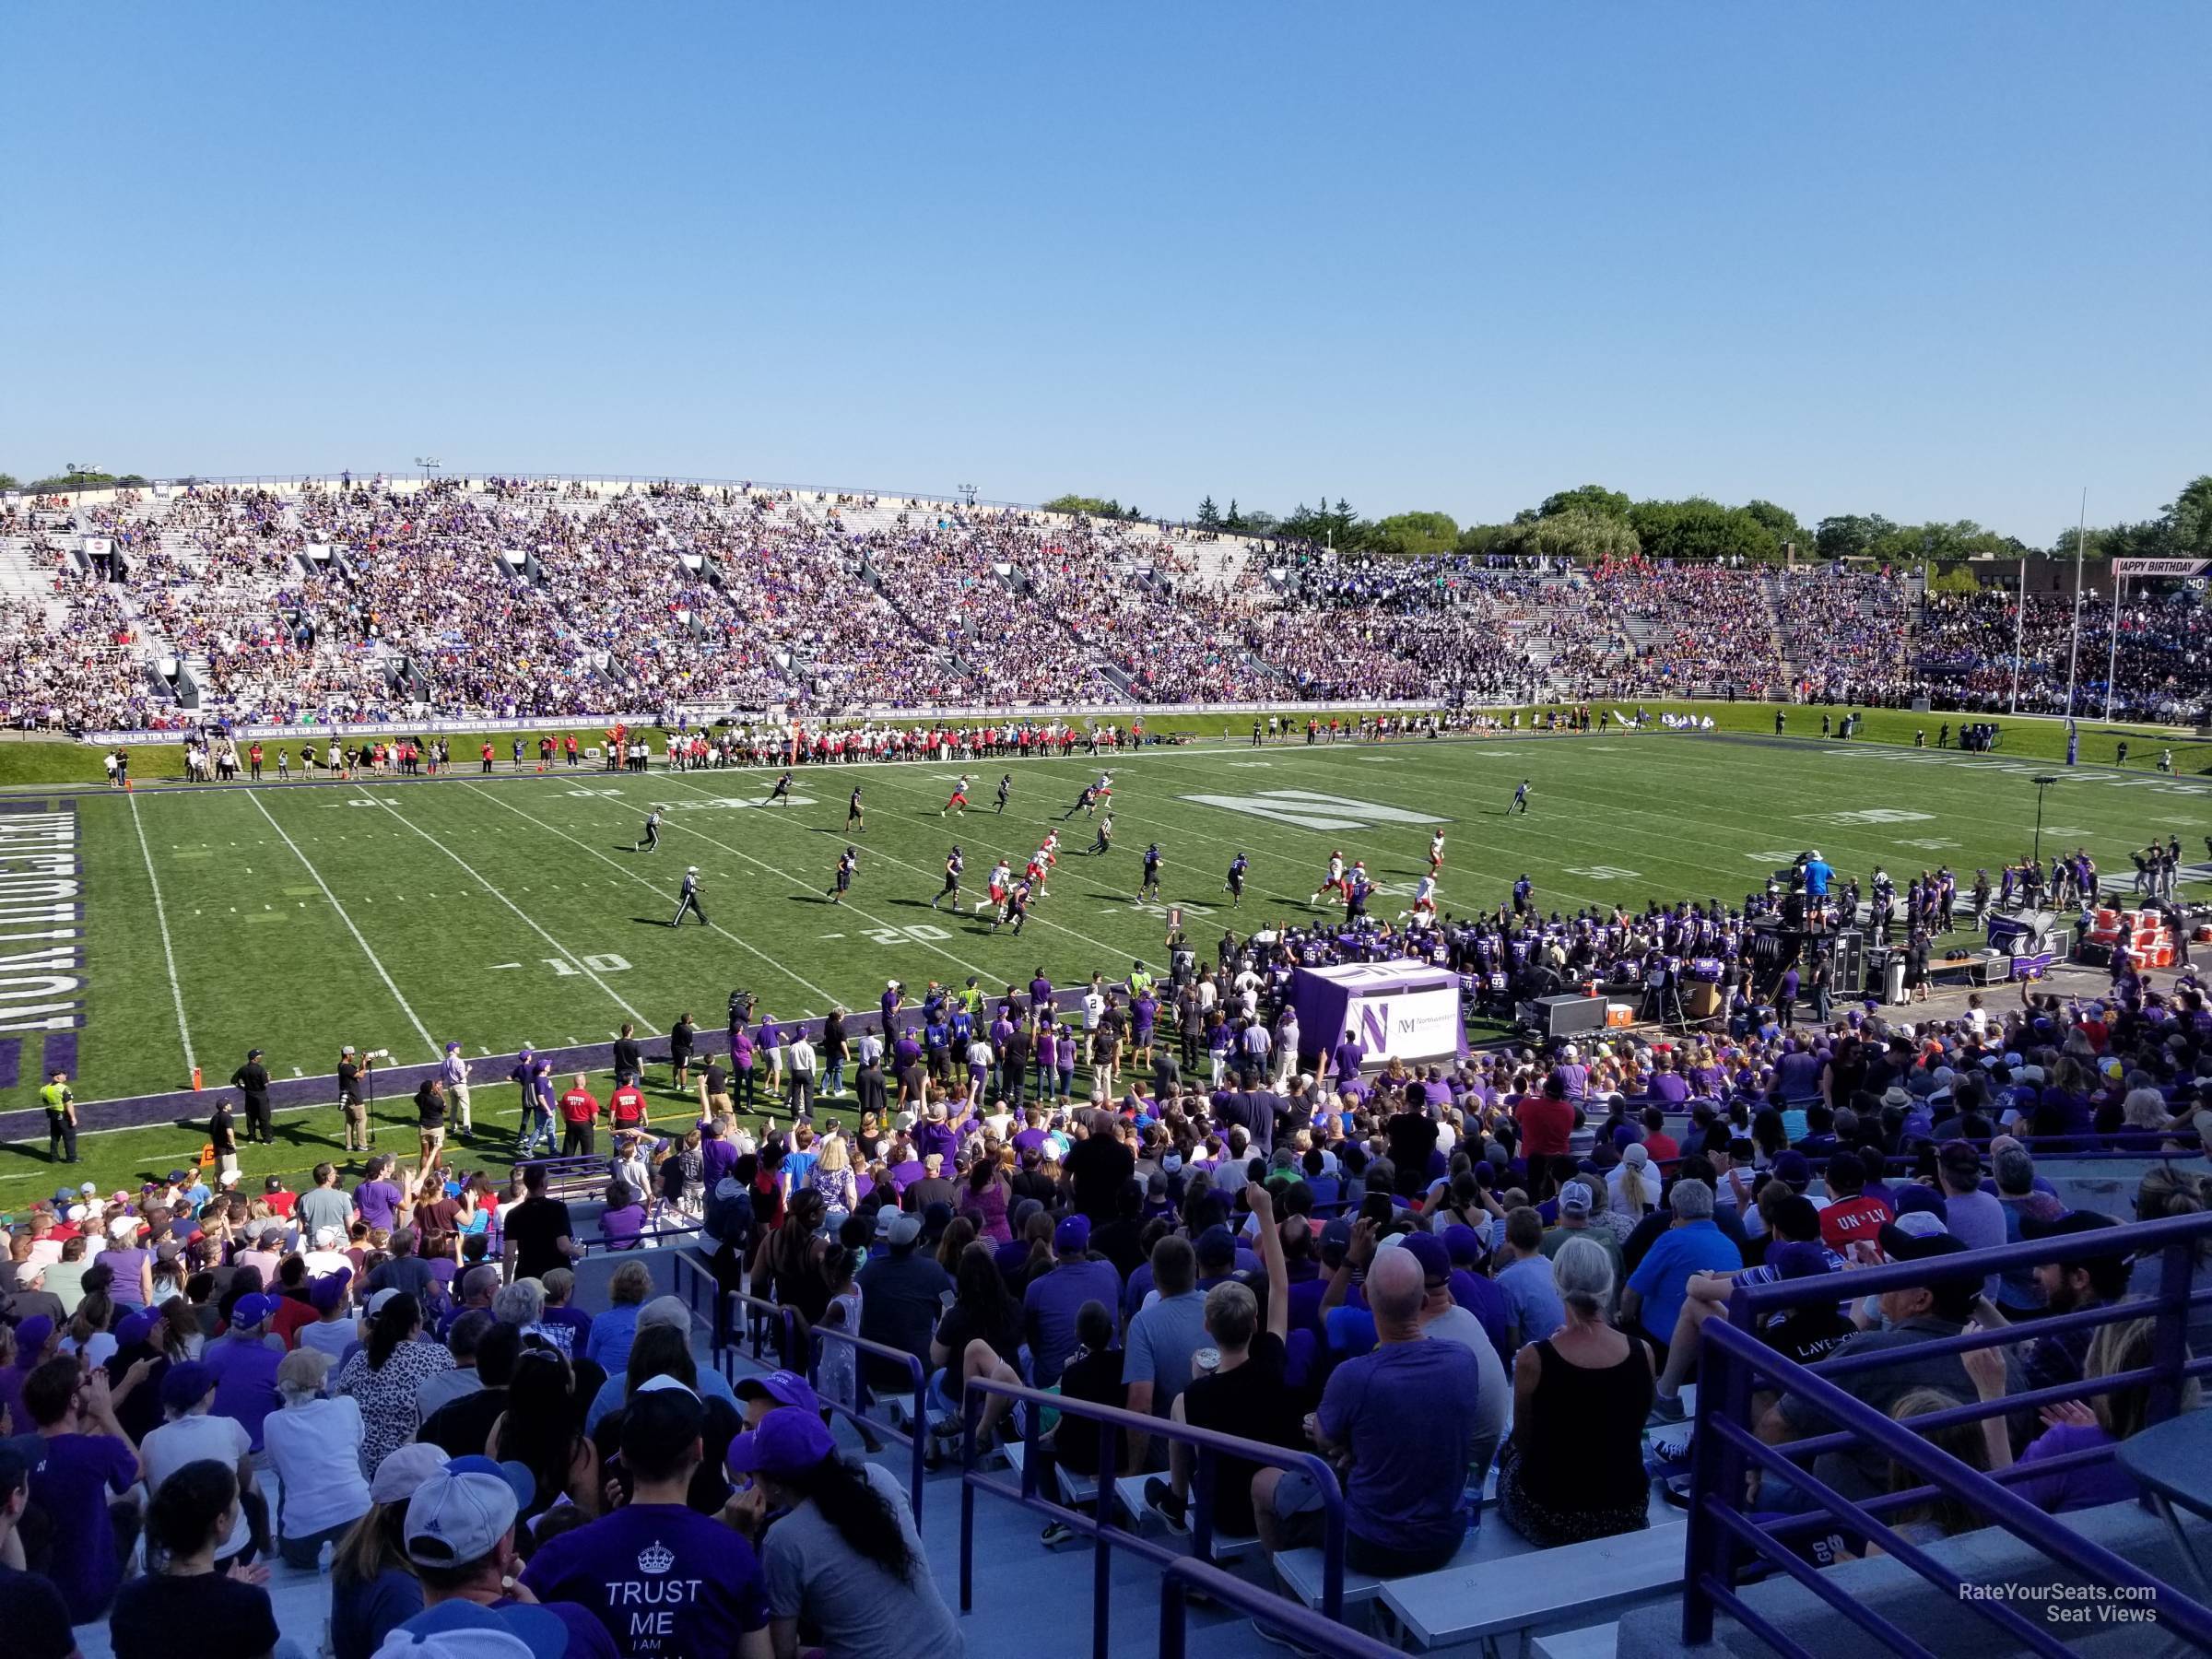 section 133, row 40 seat view  - ryan field